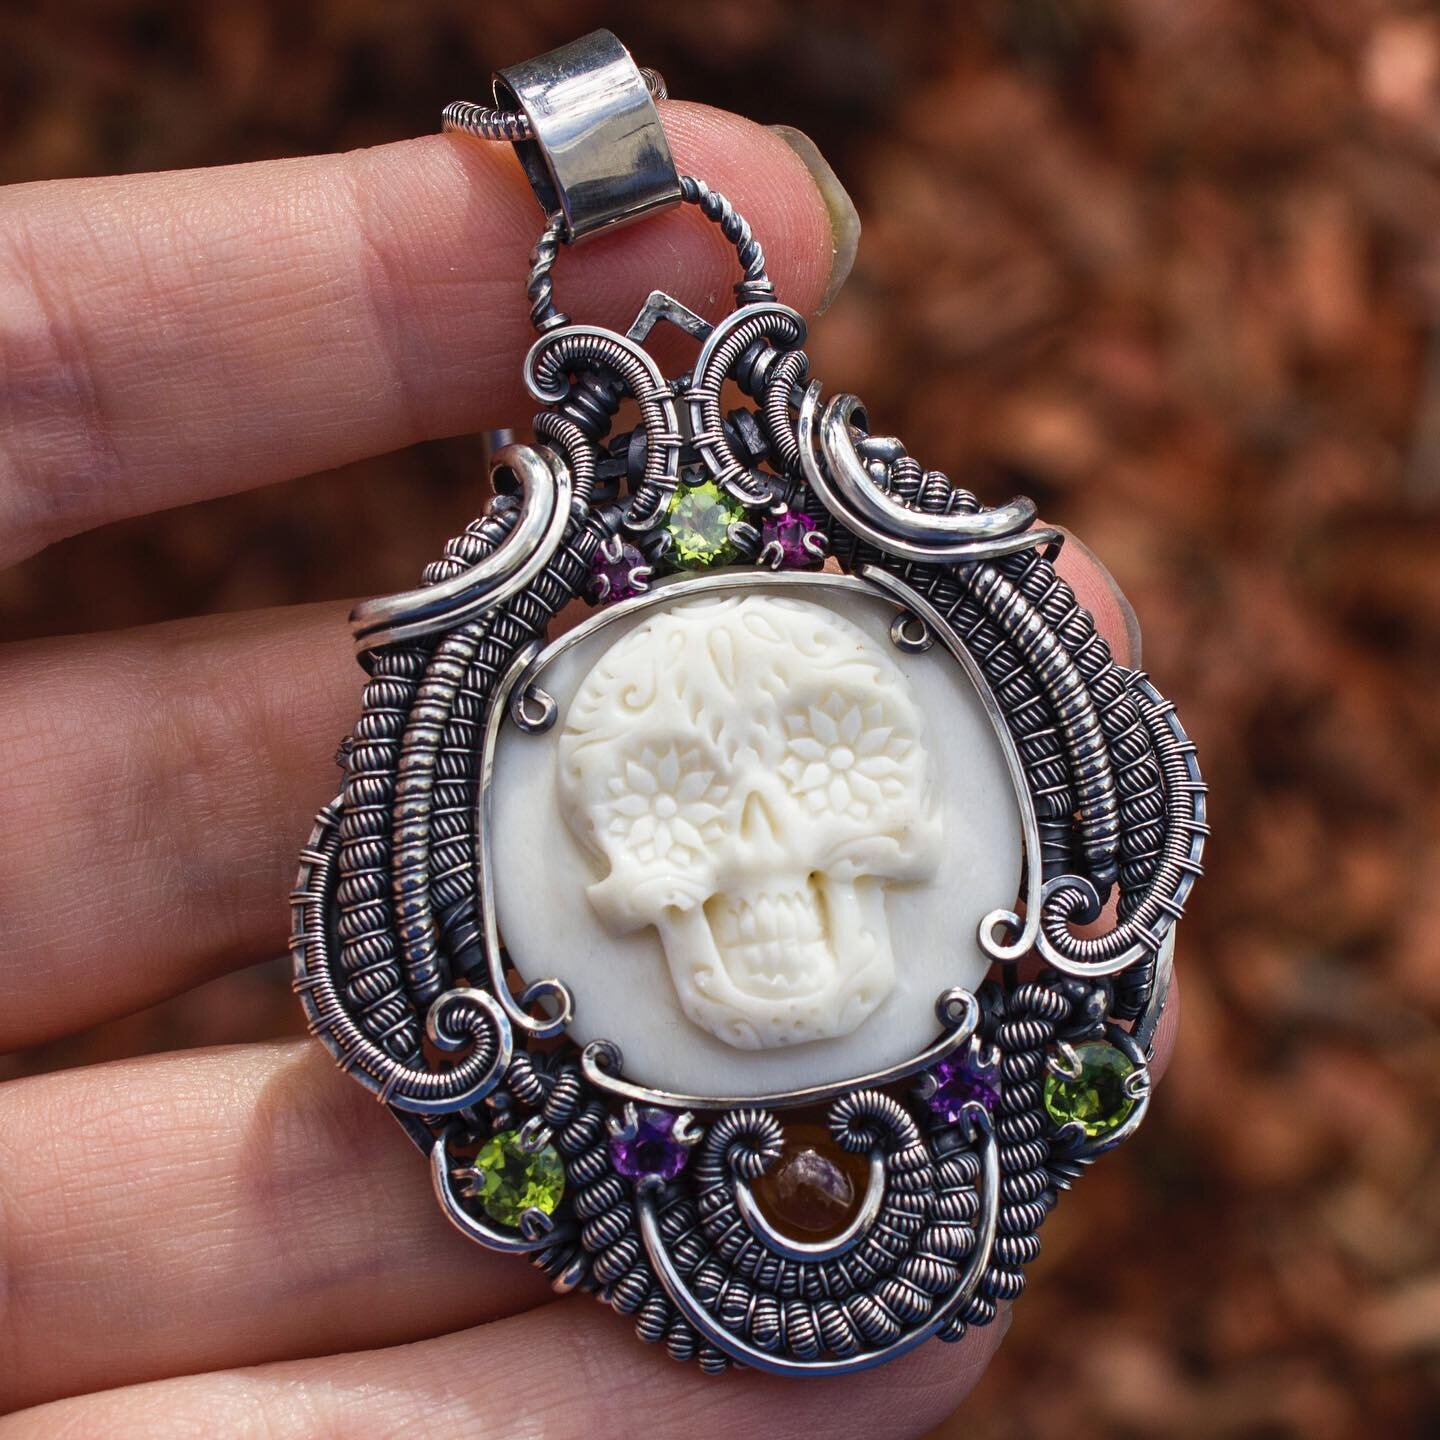 Introducing &ldquo;Sue&ntilde;o&rdquo;,
I&rsquo;m so excited about this one, I had this Sugar Skull sitting for a little while and wanted to do something really special with it! 

I created this piece inspired by my mom&rsquo;s lifelong friend from M